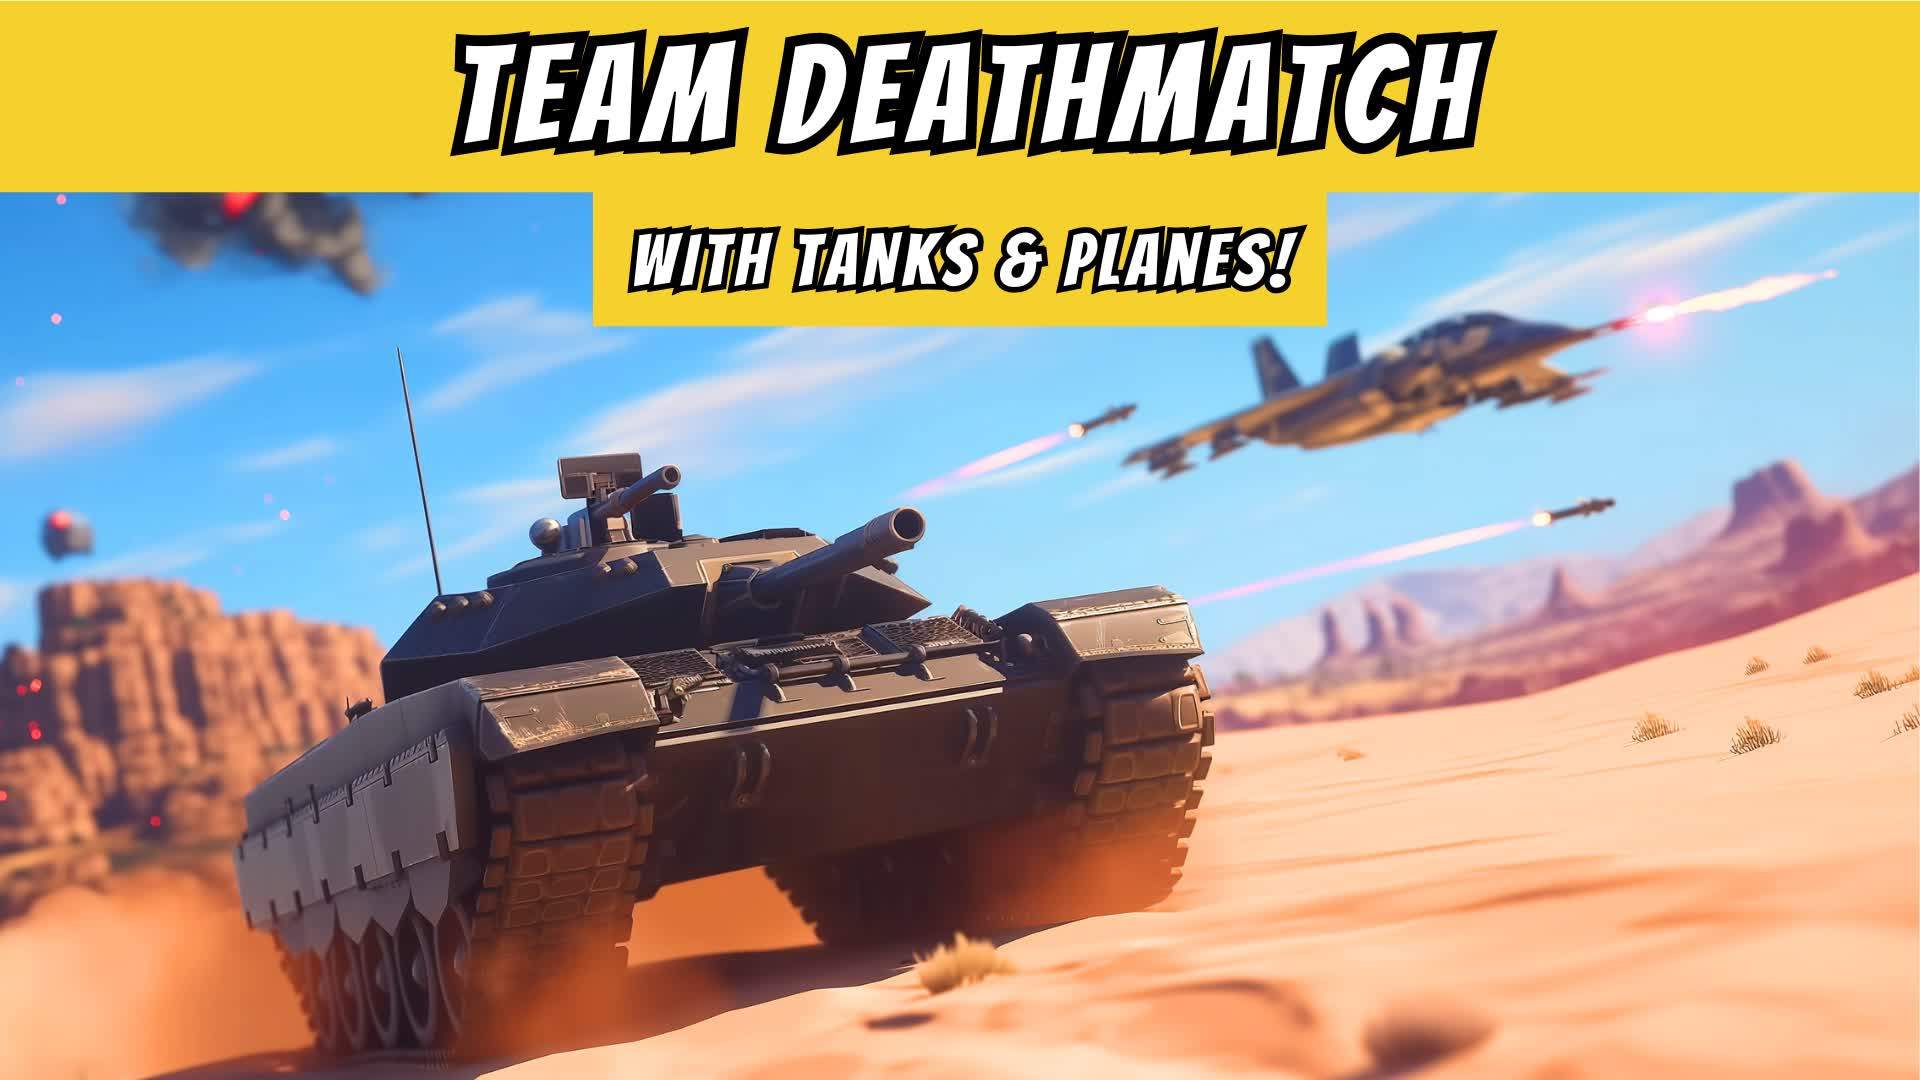 Team Deathmatch - With Tanks & Planes!